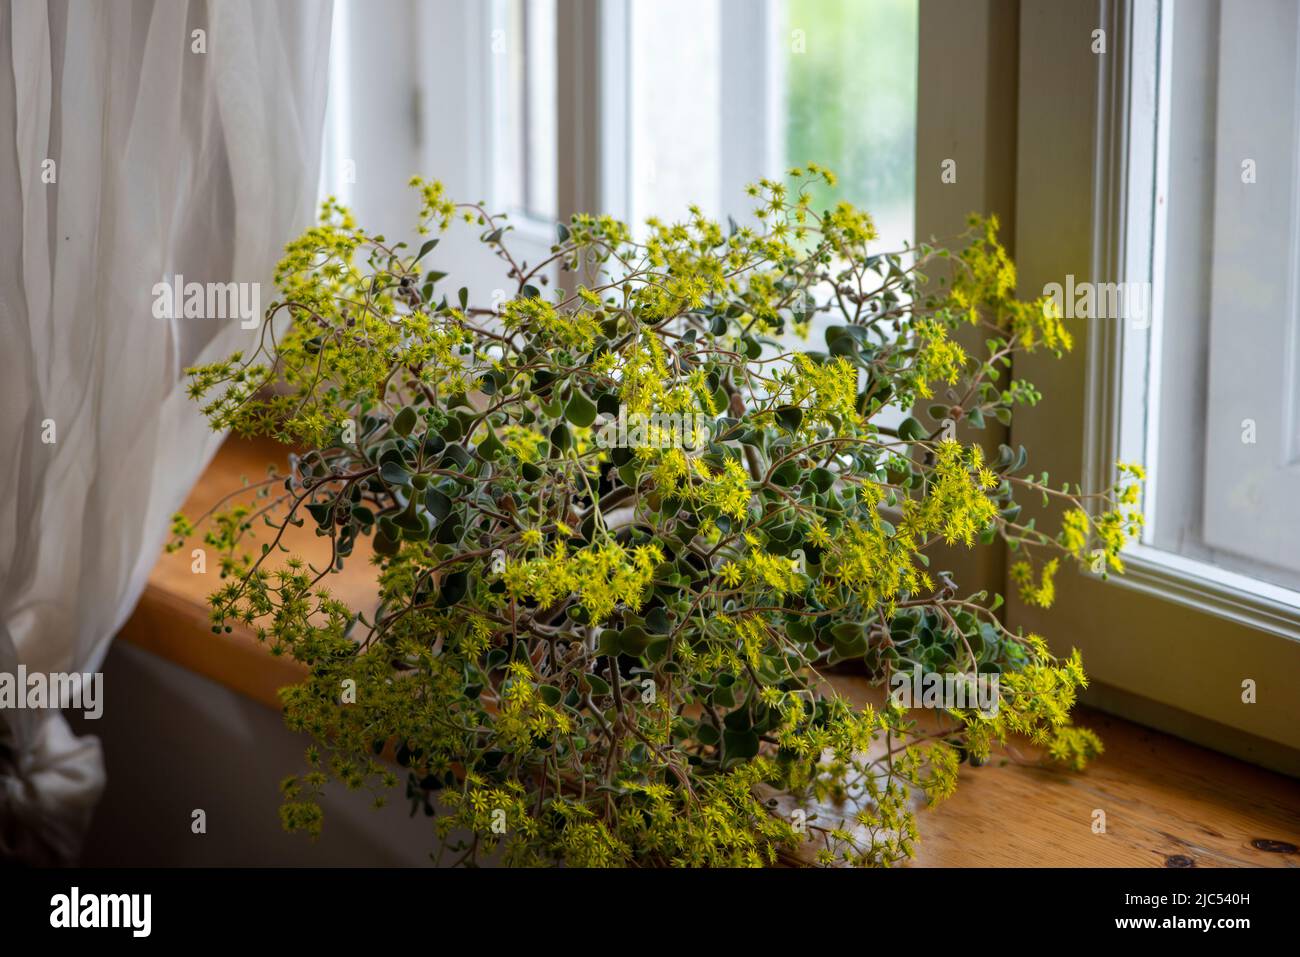 Aichryson Bethencourtianum plant with yellow flowers in the pot on windowsill. Stock Photo